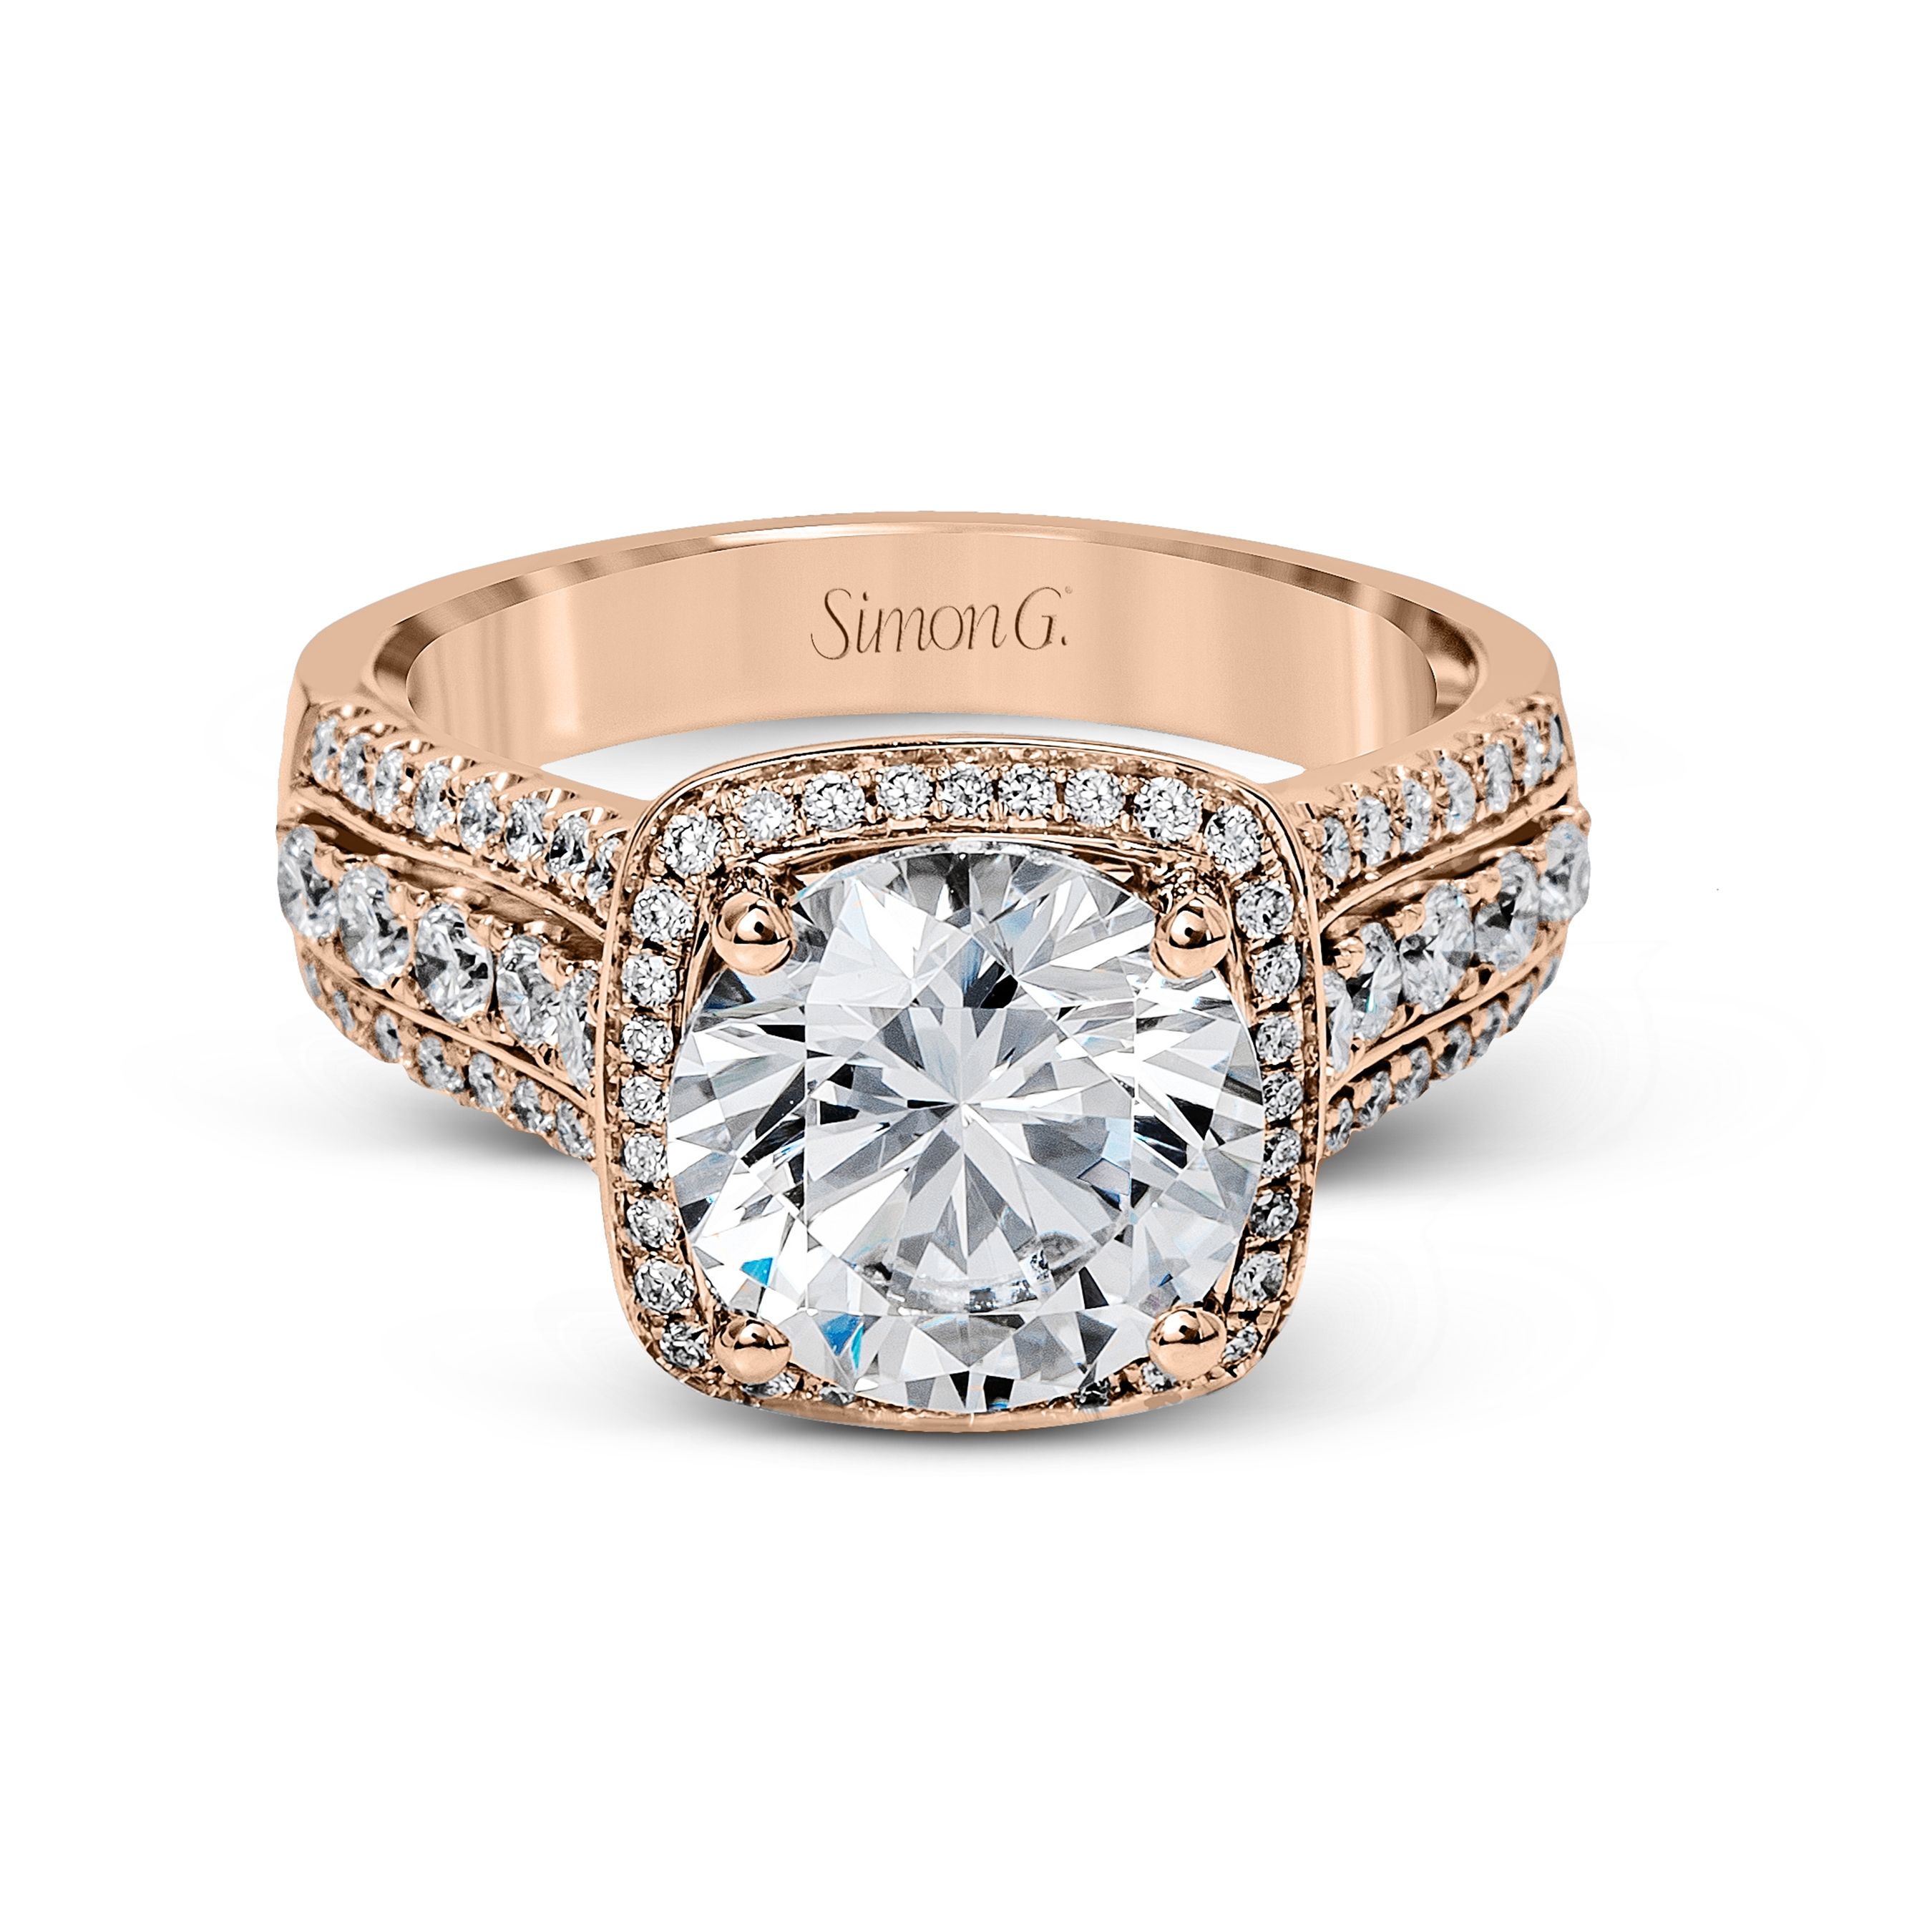 MR2614 Classic Romance Collection Rose Gold Round Cut Engagement Ring